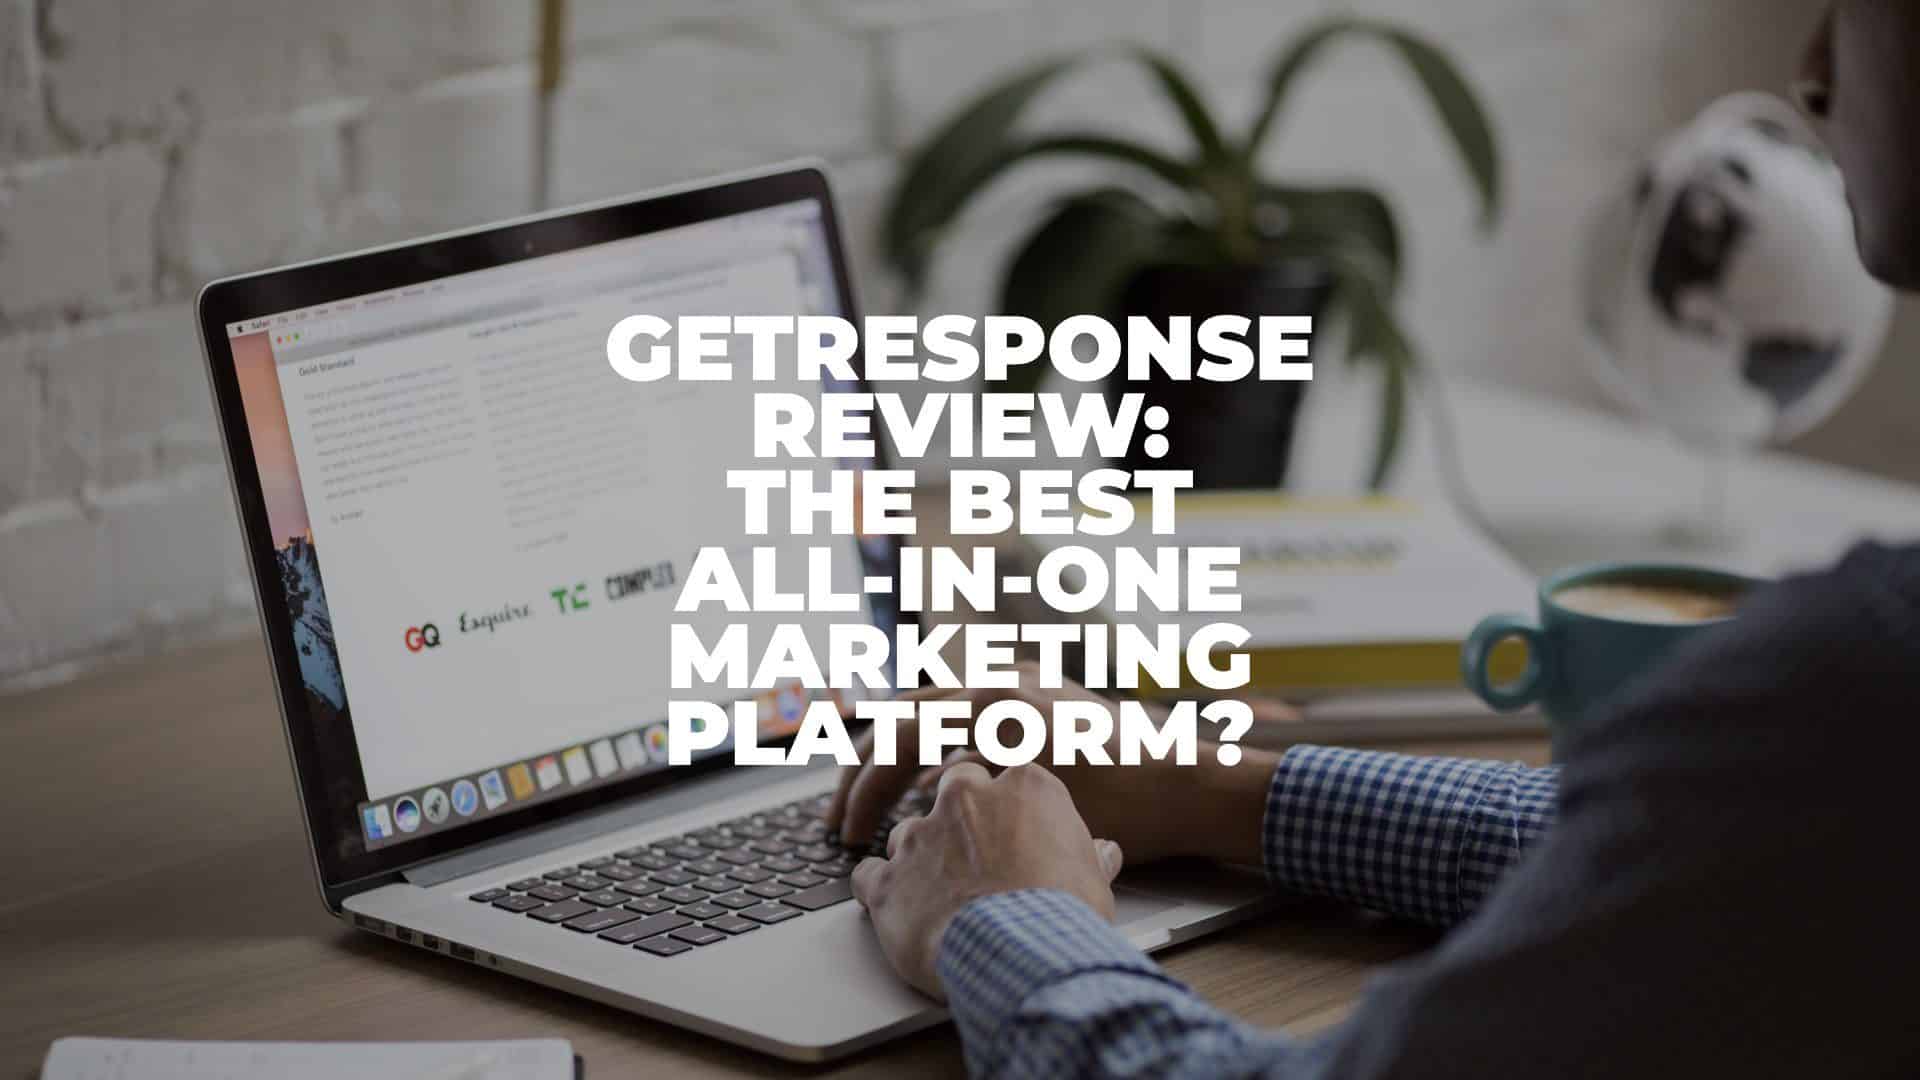 GetResponse Review - Featured Image